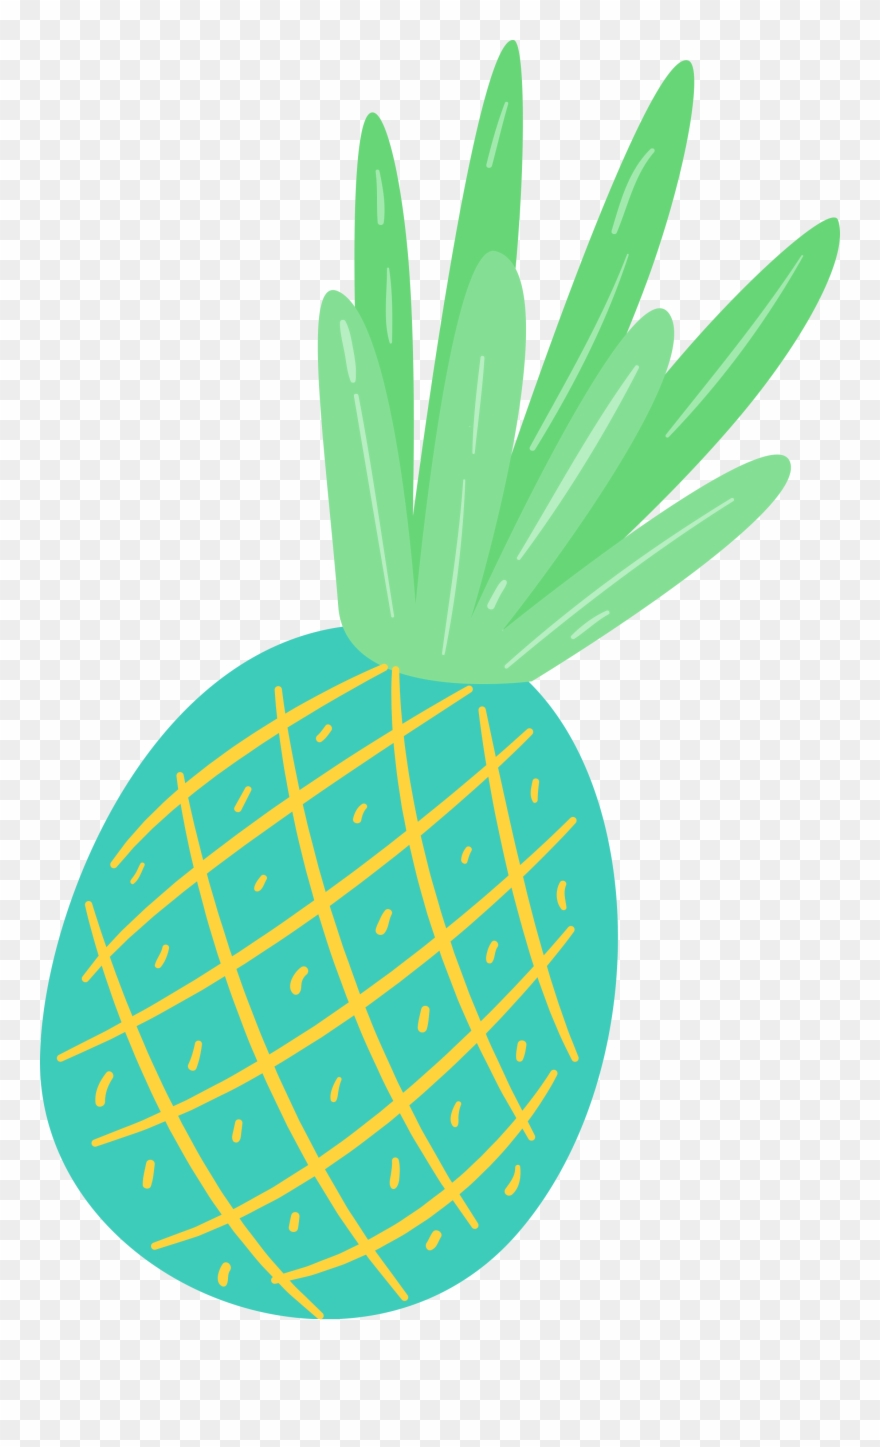 Leave pineapple and.